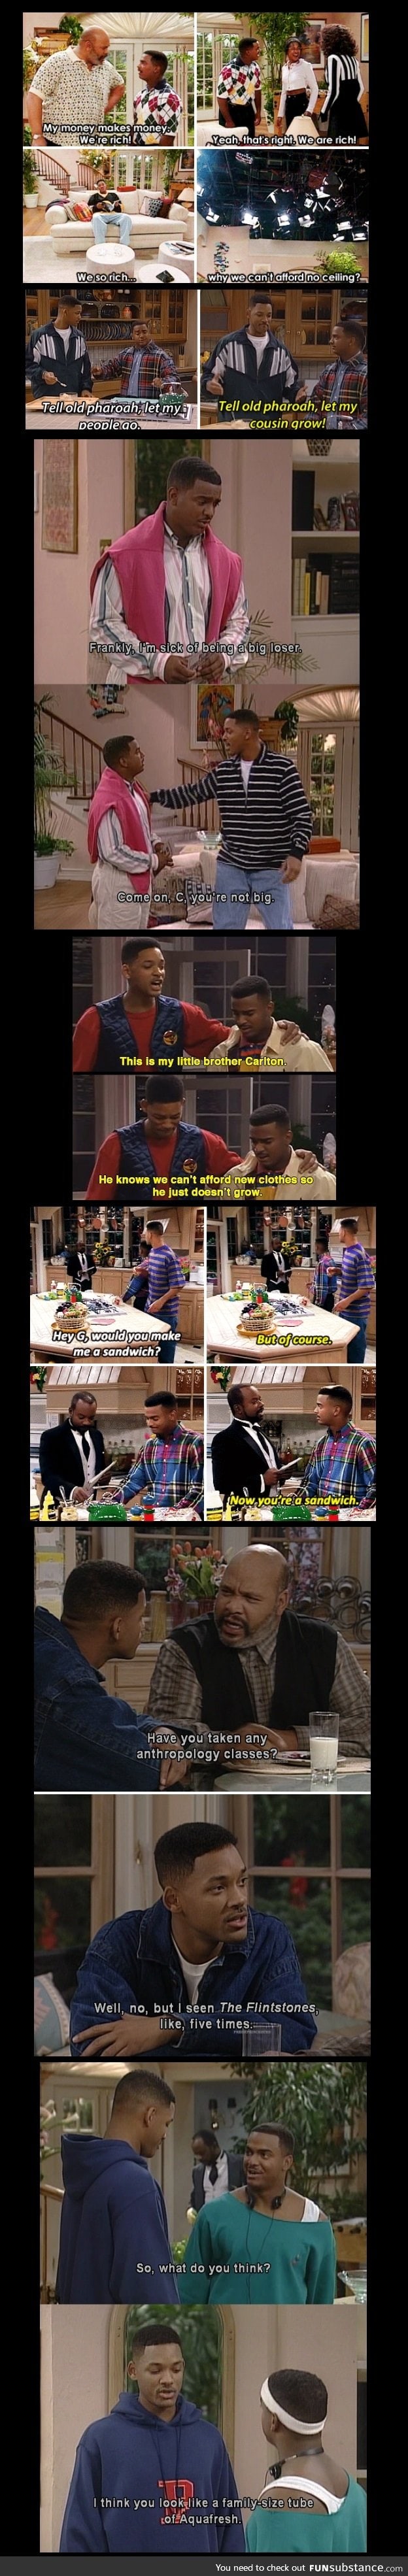 some more fresh prince (you're welcome)